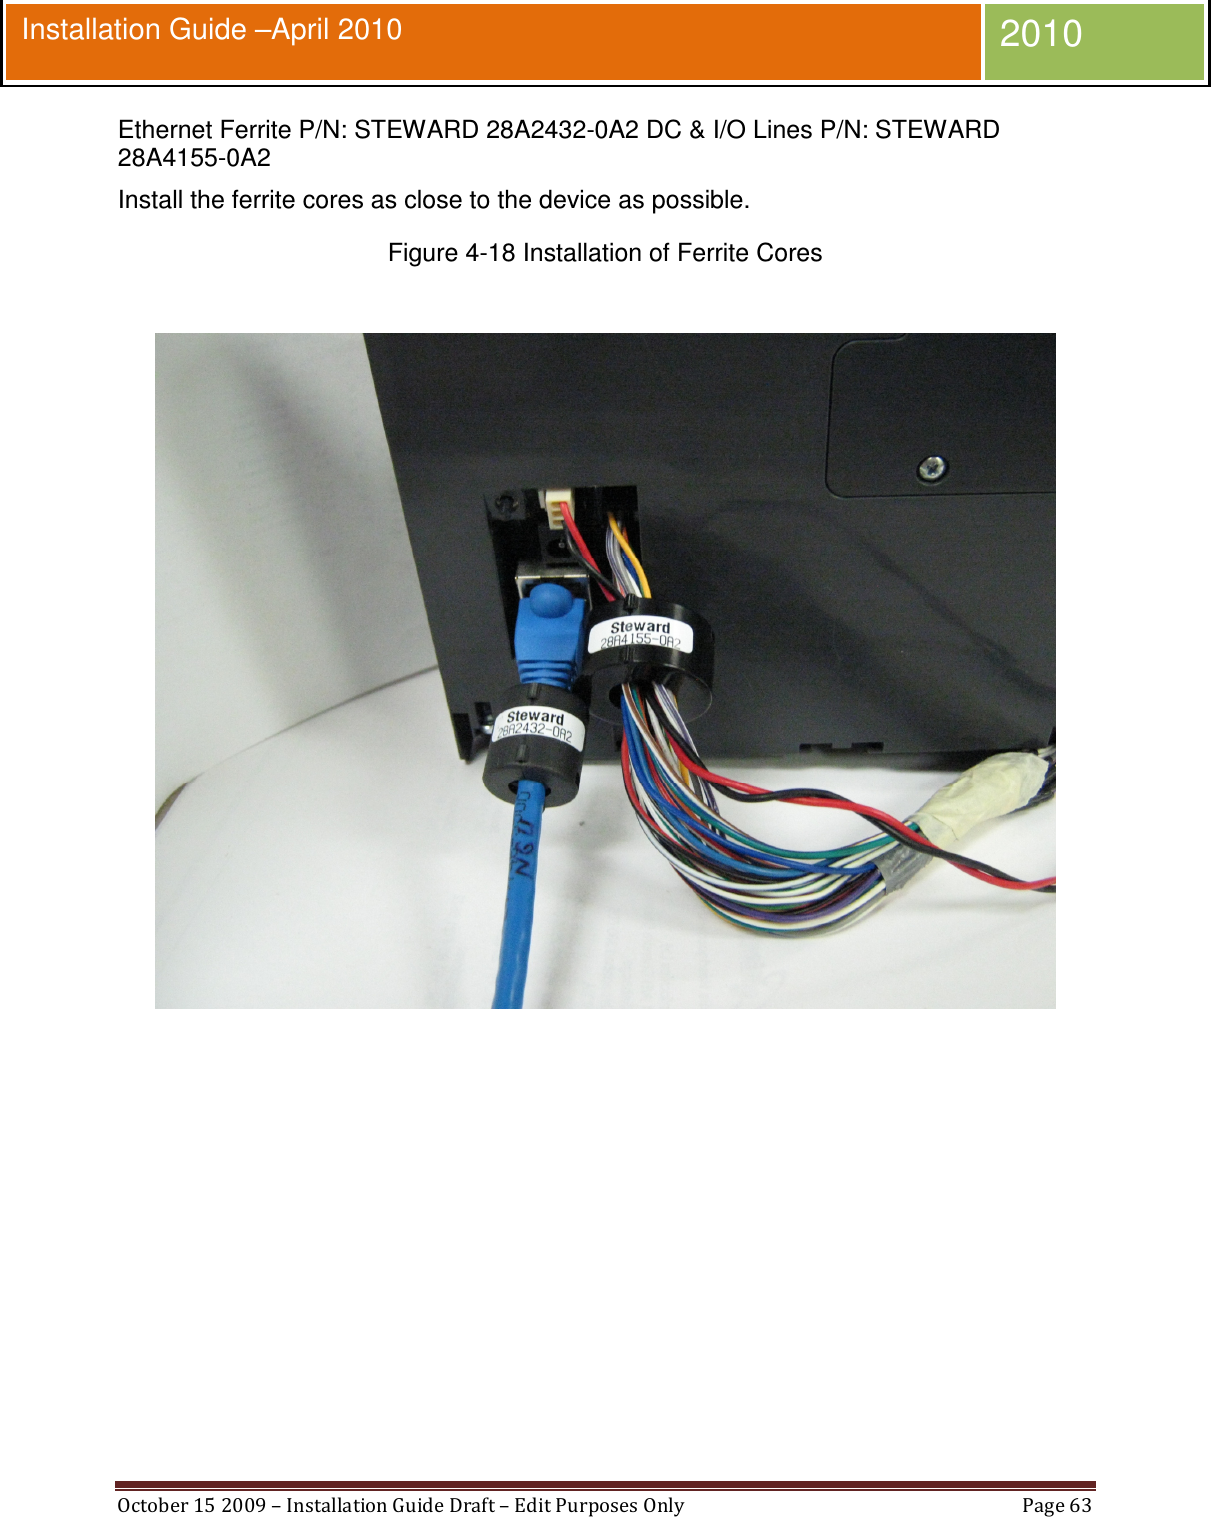  October 15 2009 – Installation Guide Draft – Edit Purposes Only  Page 63  Installation Guide –April 2010 2010 Ethernet Ferrite P/N: STEWARD 28A2432-0A2 DC &amp; I/O Lines P/N: STEWARD 28A4155-0A2 Install the ferrite cores as close to the device as possible. Figure 4-18 Installation of Ferrite Cores     